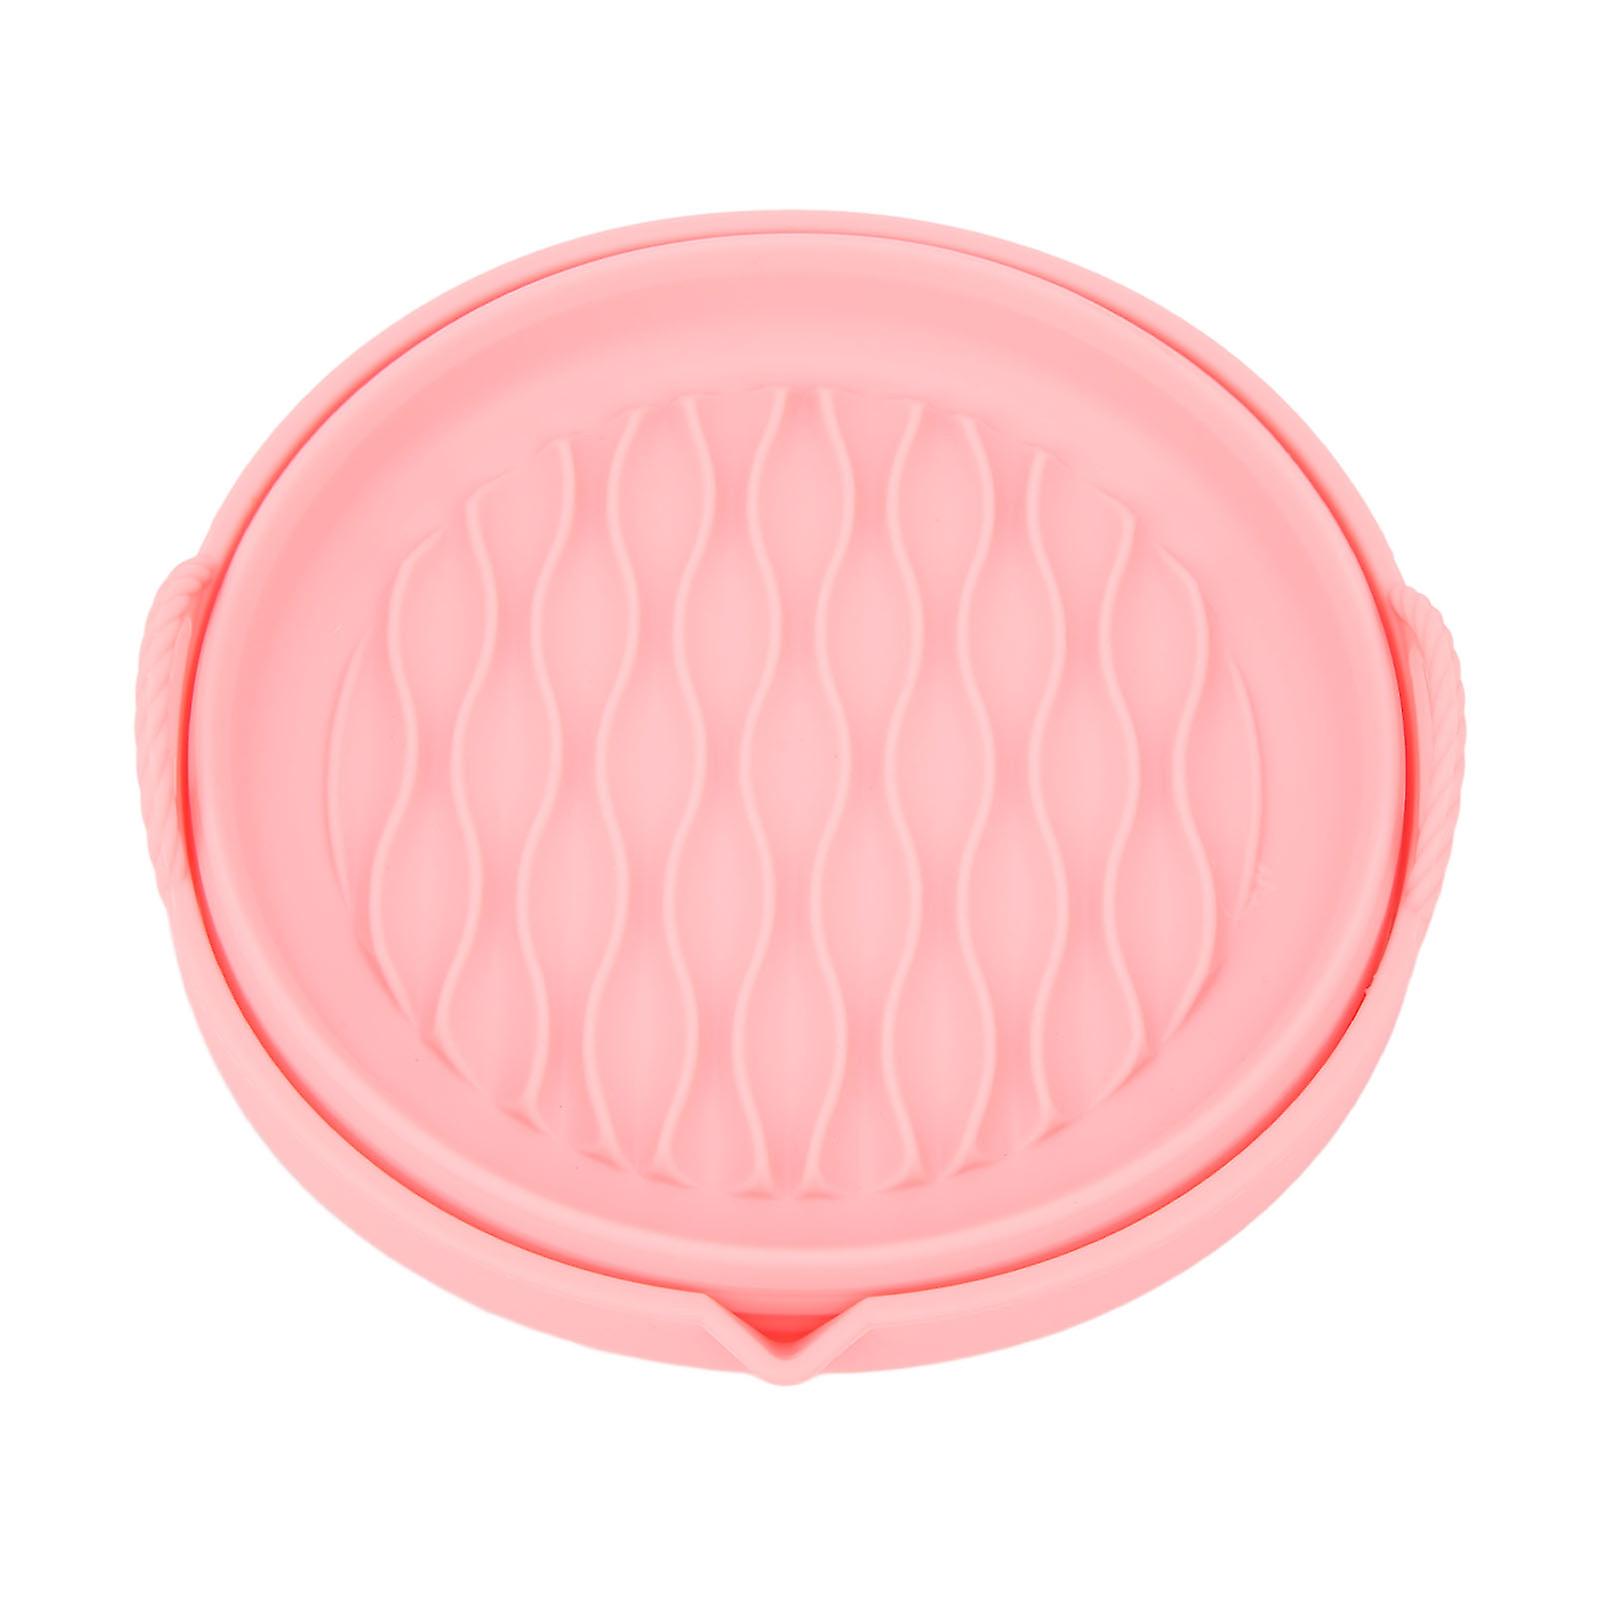 Silicone Air Cooker Pot Round Foldable Fryer Liner Tray Replacement for Kitchen Cooking Accessories Pink